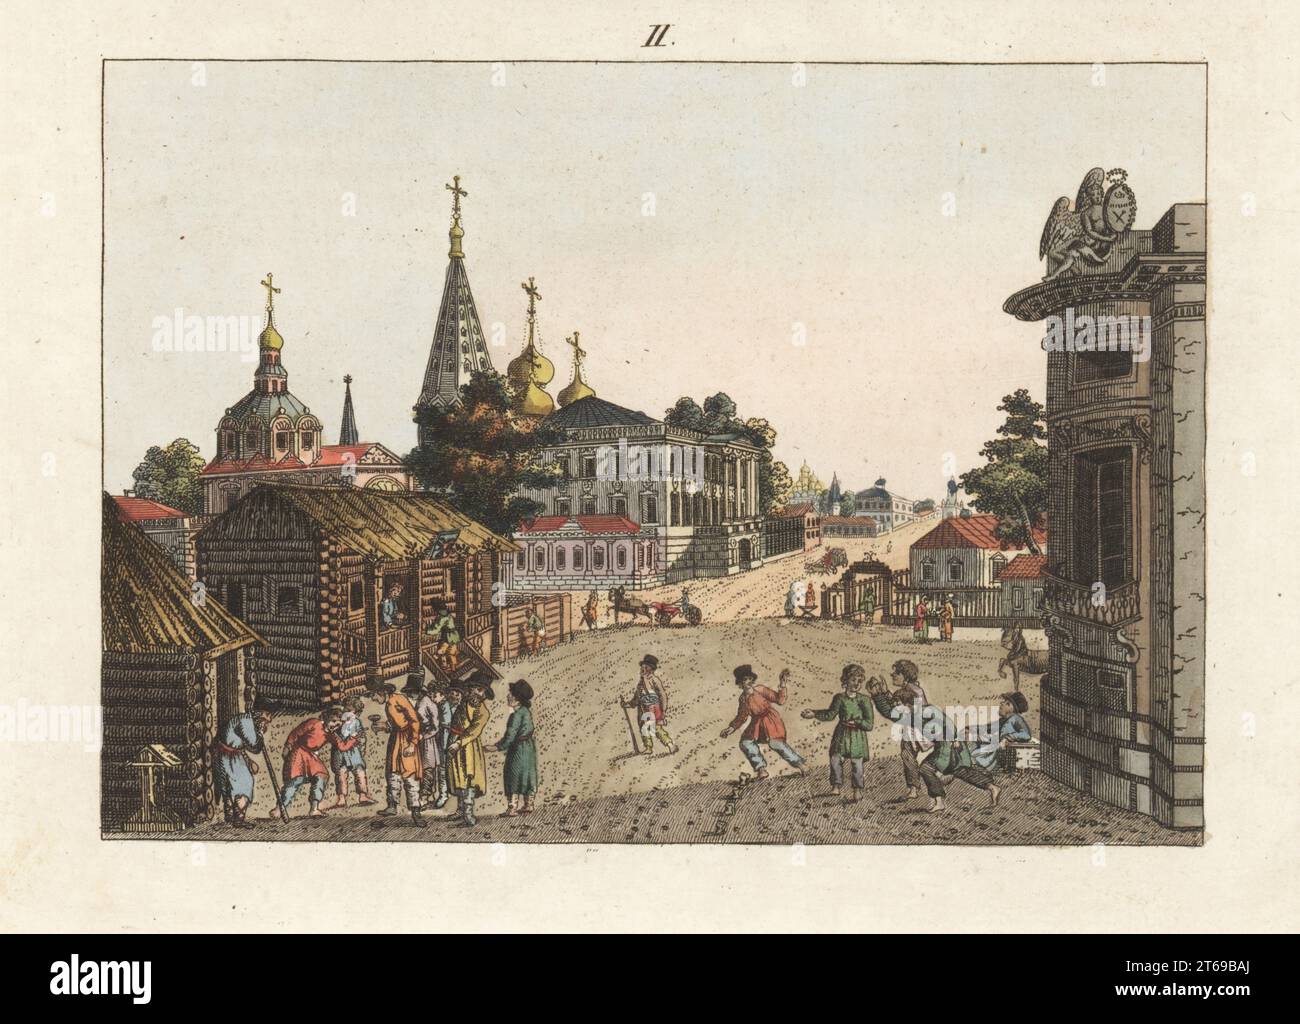 Children playing Babki (knucklebones) and Swaika (dropping a heavy nail into a ring on the ground). Popular street games in Moscow, Russia. Architecture includes log cabins, church spires and domes, neoclassical buildings. Handcoloured copperplate engraving from Carl Bertuch's Bilderbuch fur Kinder (Picture Book for Children), Weimar, 1813. A 12-volume encyclopedia for children illustrated with almost 1,200 engraved plates on natural history, science, costume, mythology, etc., published from 1790-1830. Stock Photo